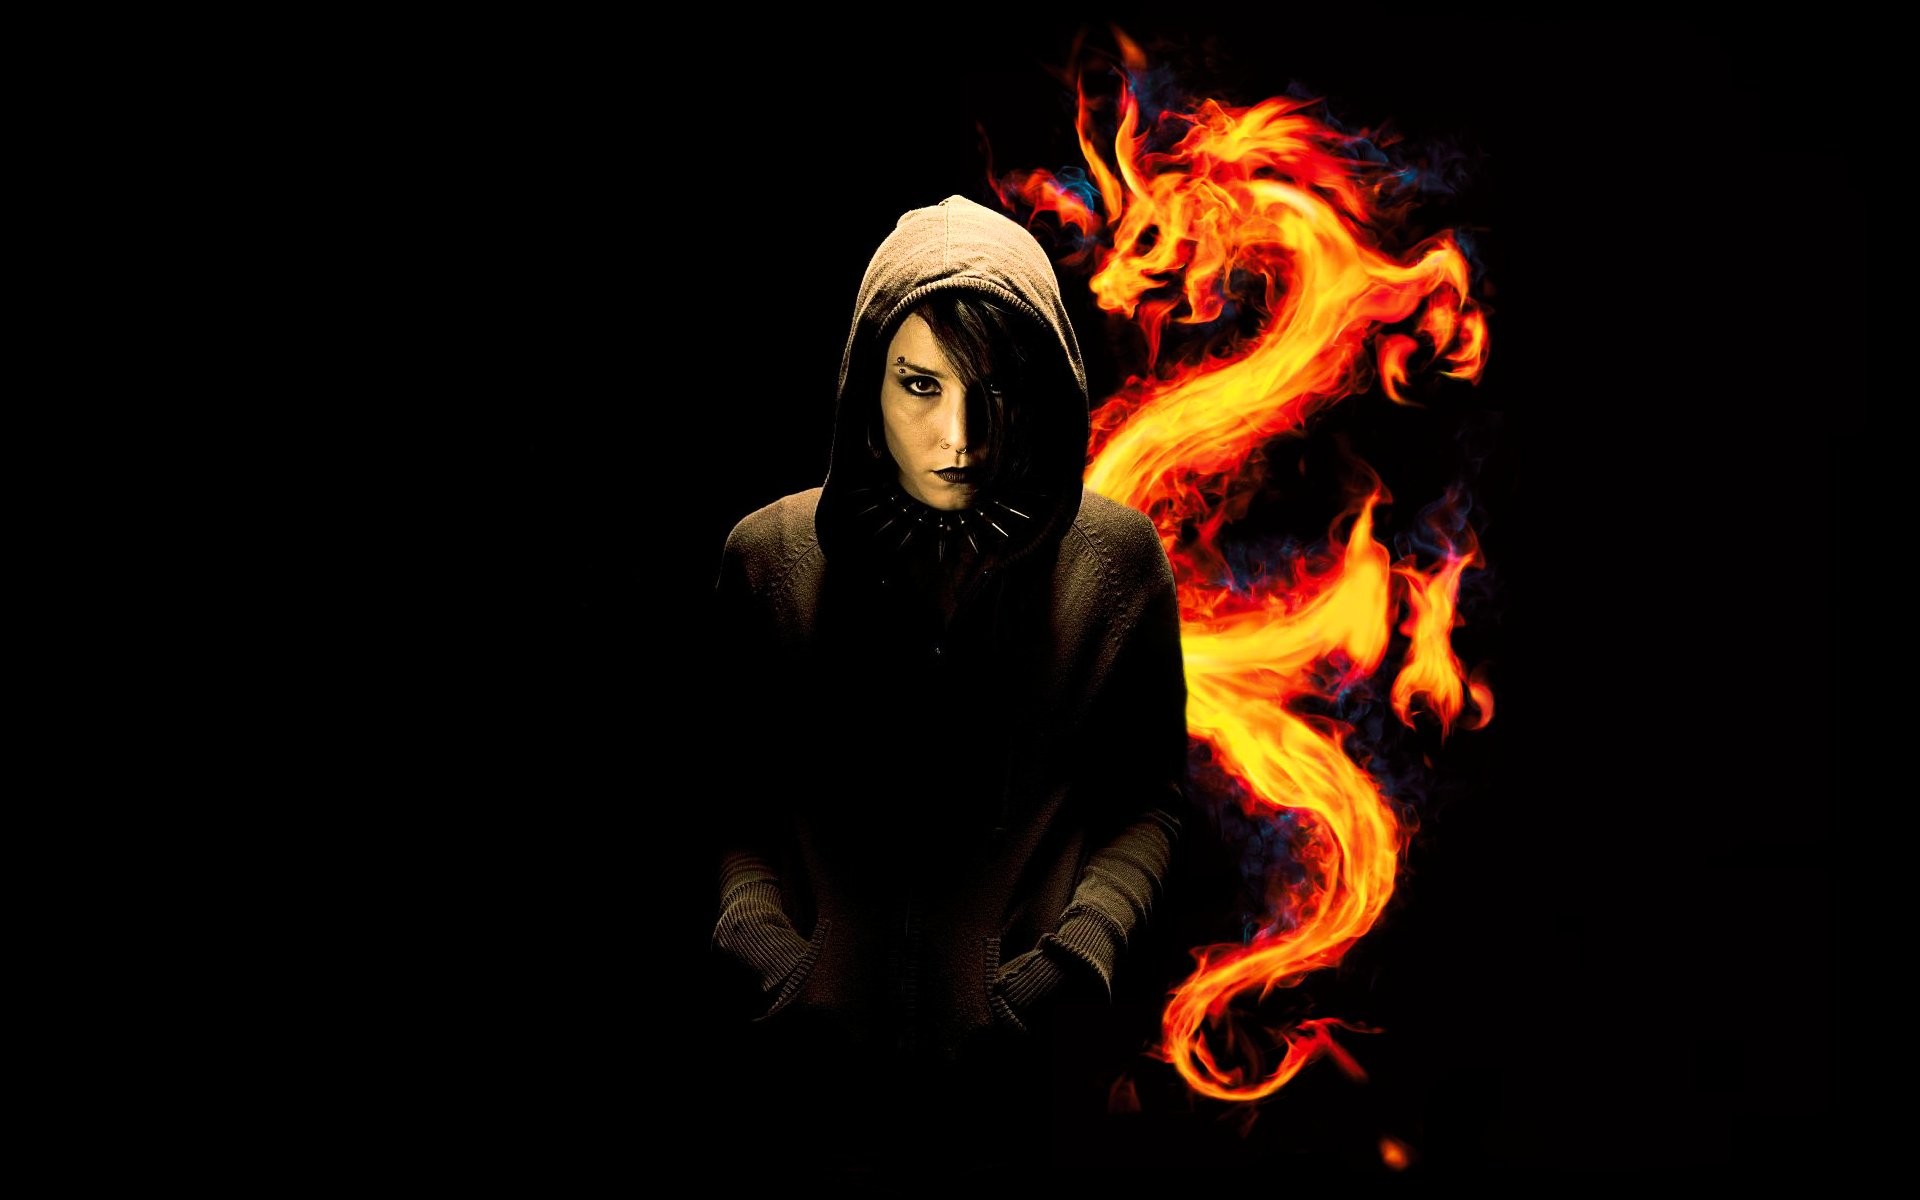 Dark, Horror, Hd Horror Wallpapers, Smart Phone Background, - Dragon Tattoo  With Black Background - 1920x1200 Wallpaper 